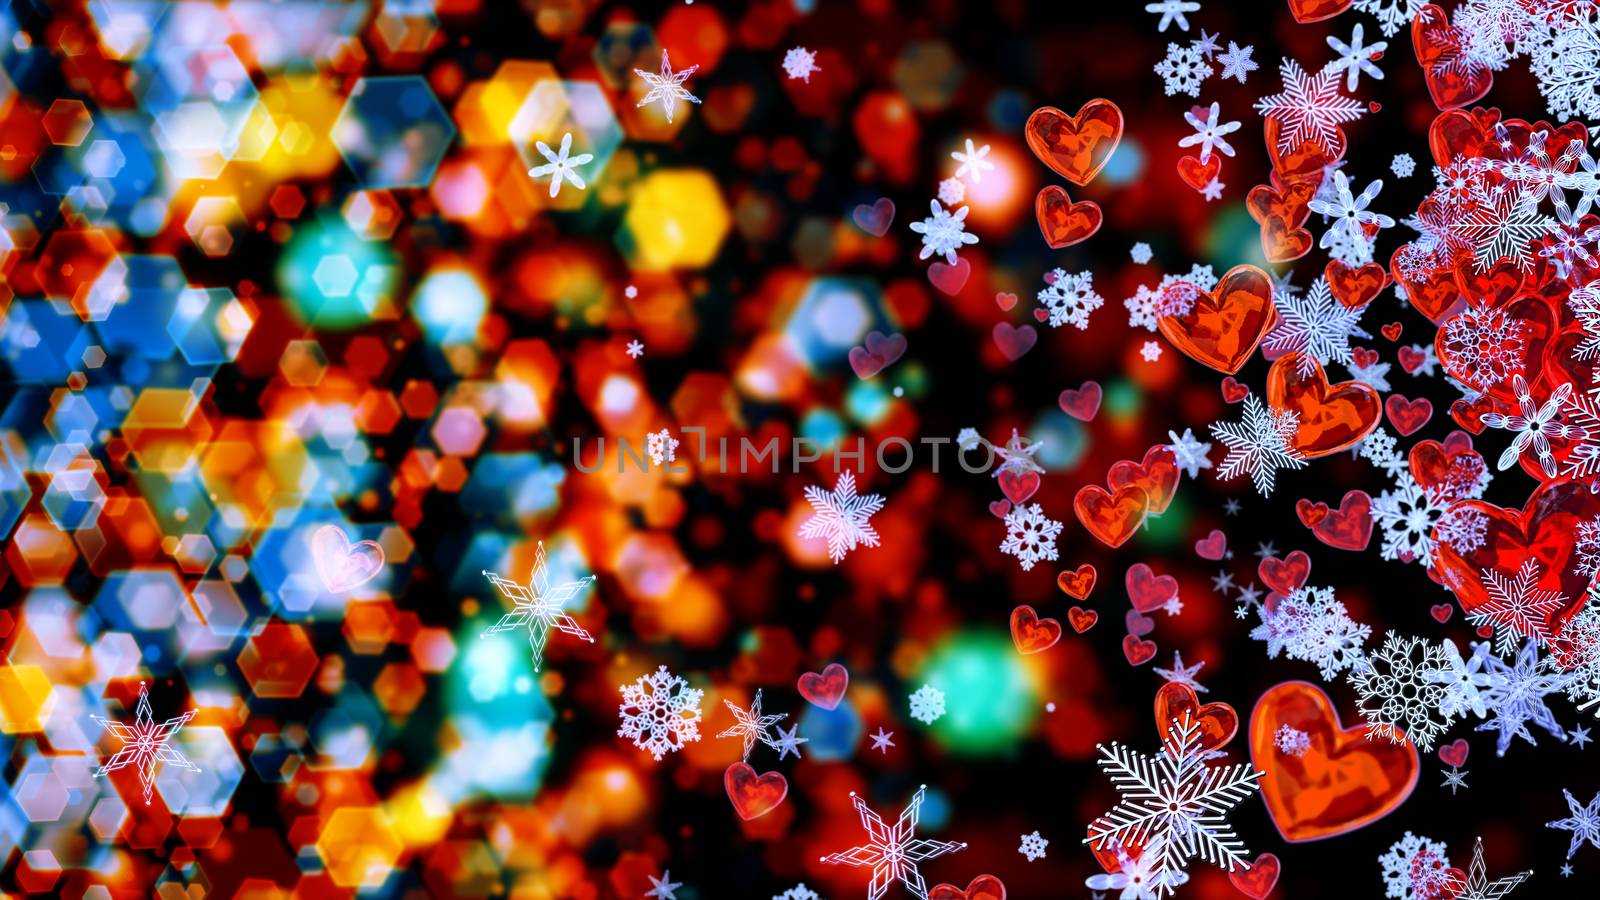 Set of hearts and snowflakes with a colored bokeh backdrop as a symbol of romantic love for the congratulations on Valentine's Day in february and winter weddings. Abstract horizontal background.